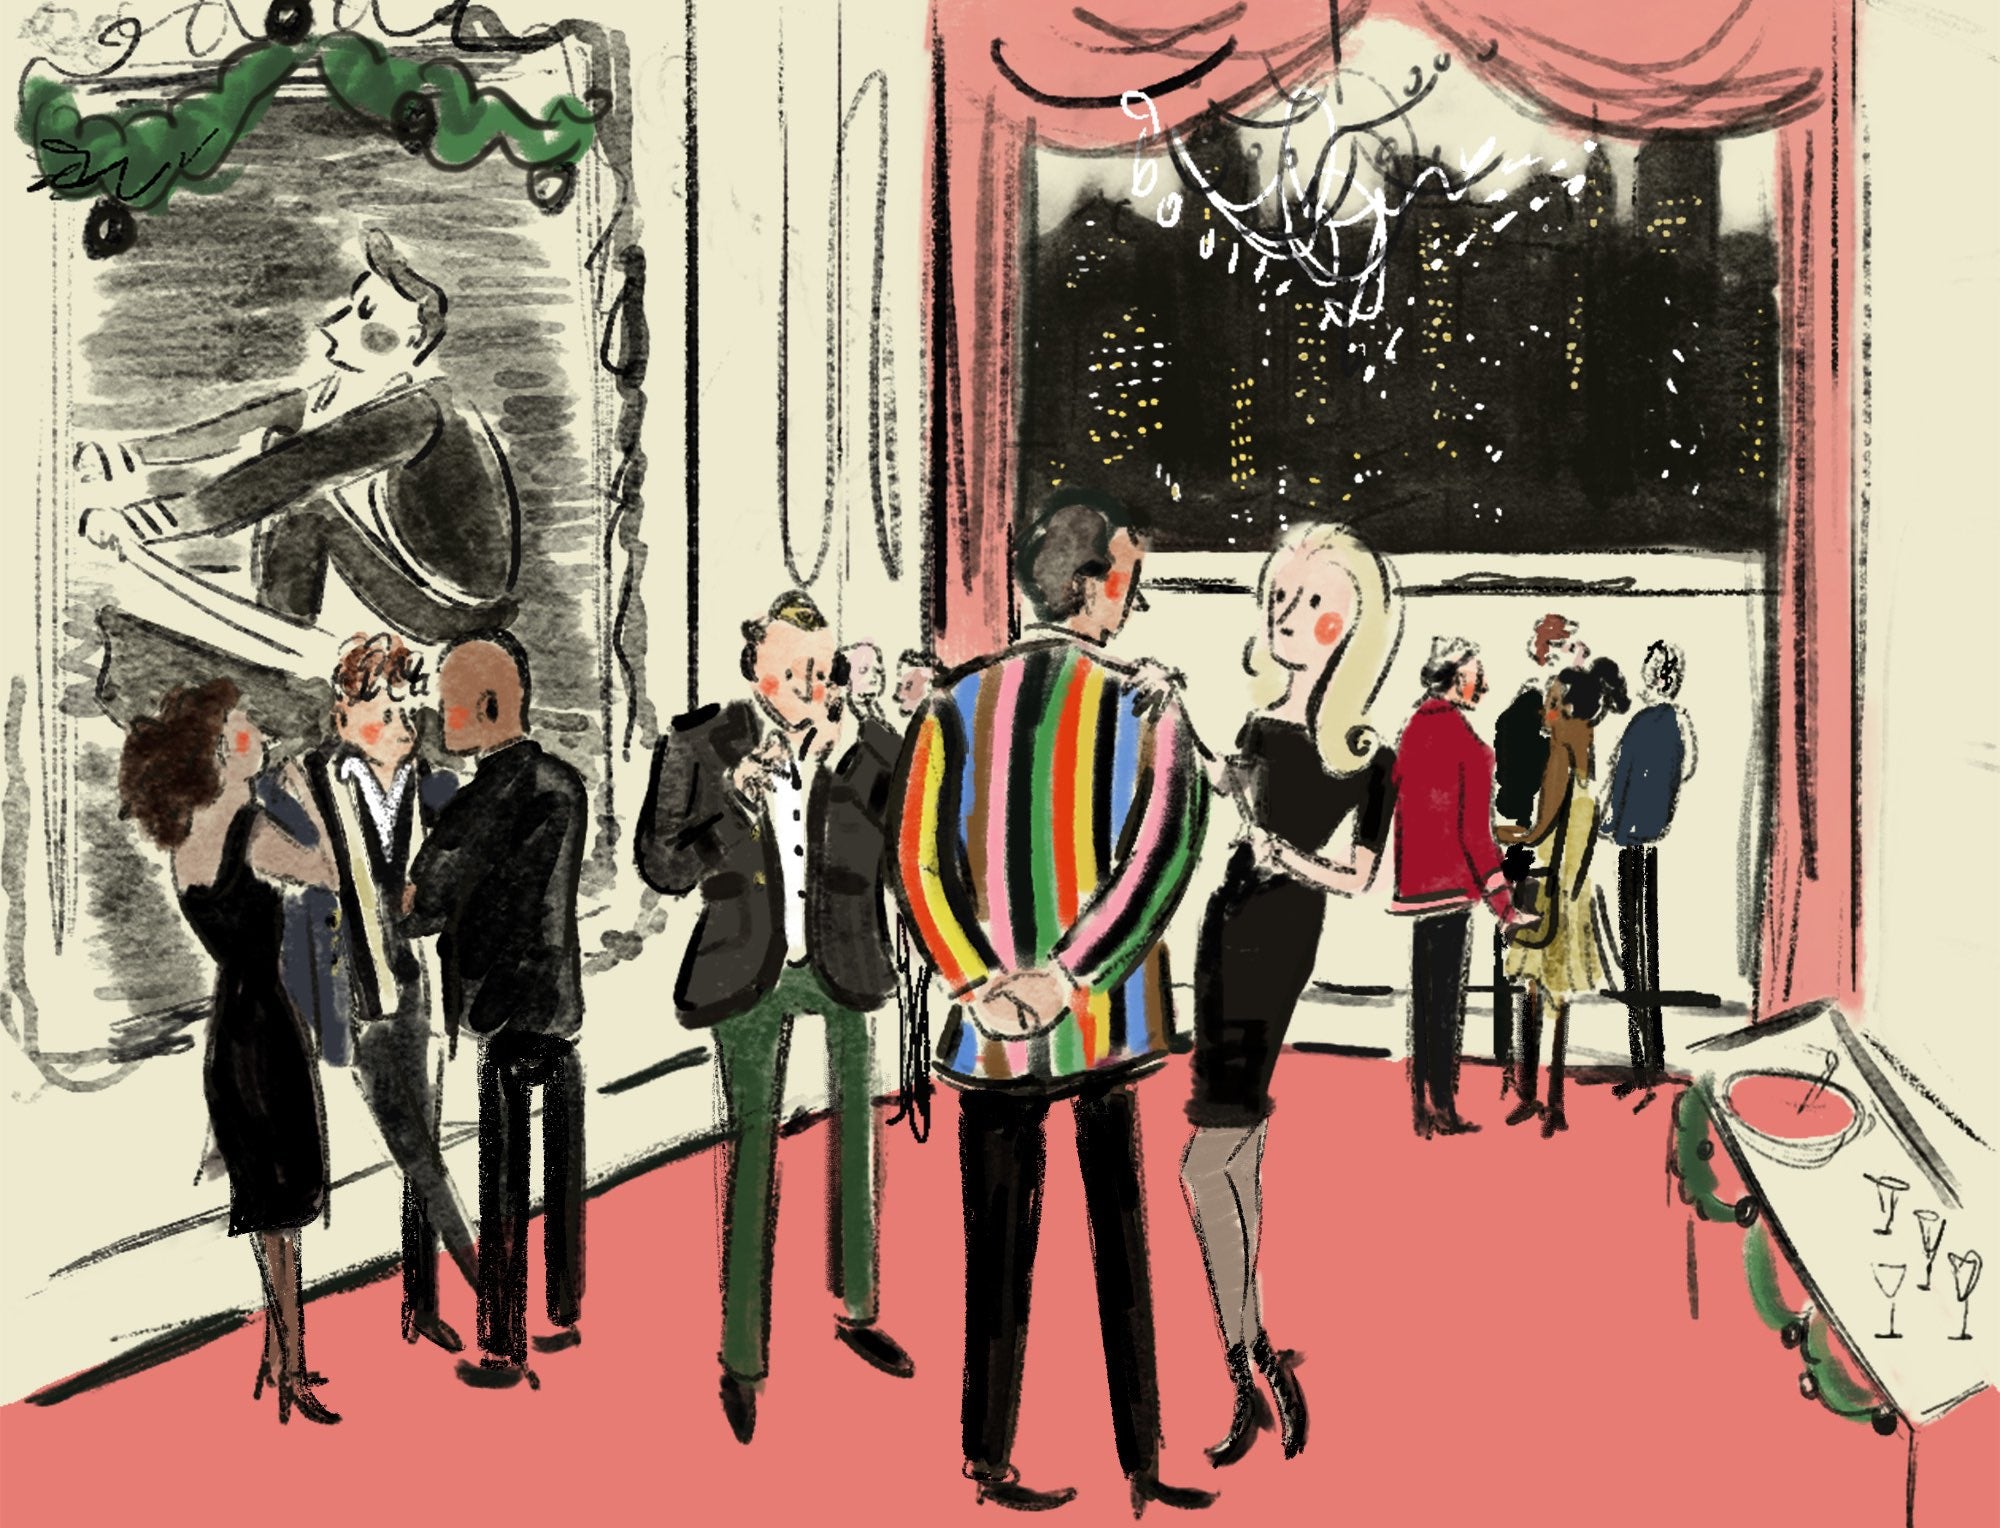 Tug Rice for Rowing Blazers (Four holiday illustrations by NYC artist Tug Rice)